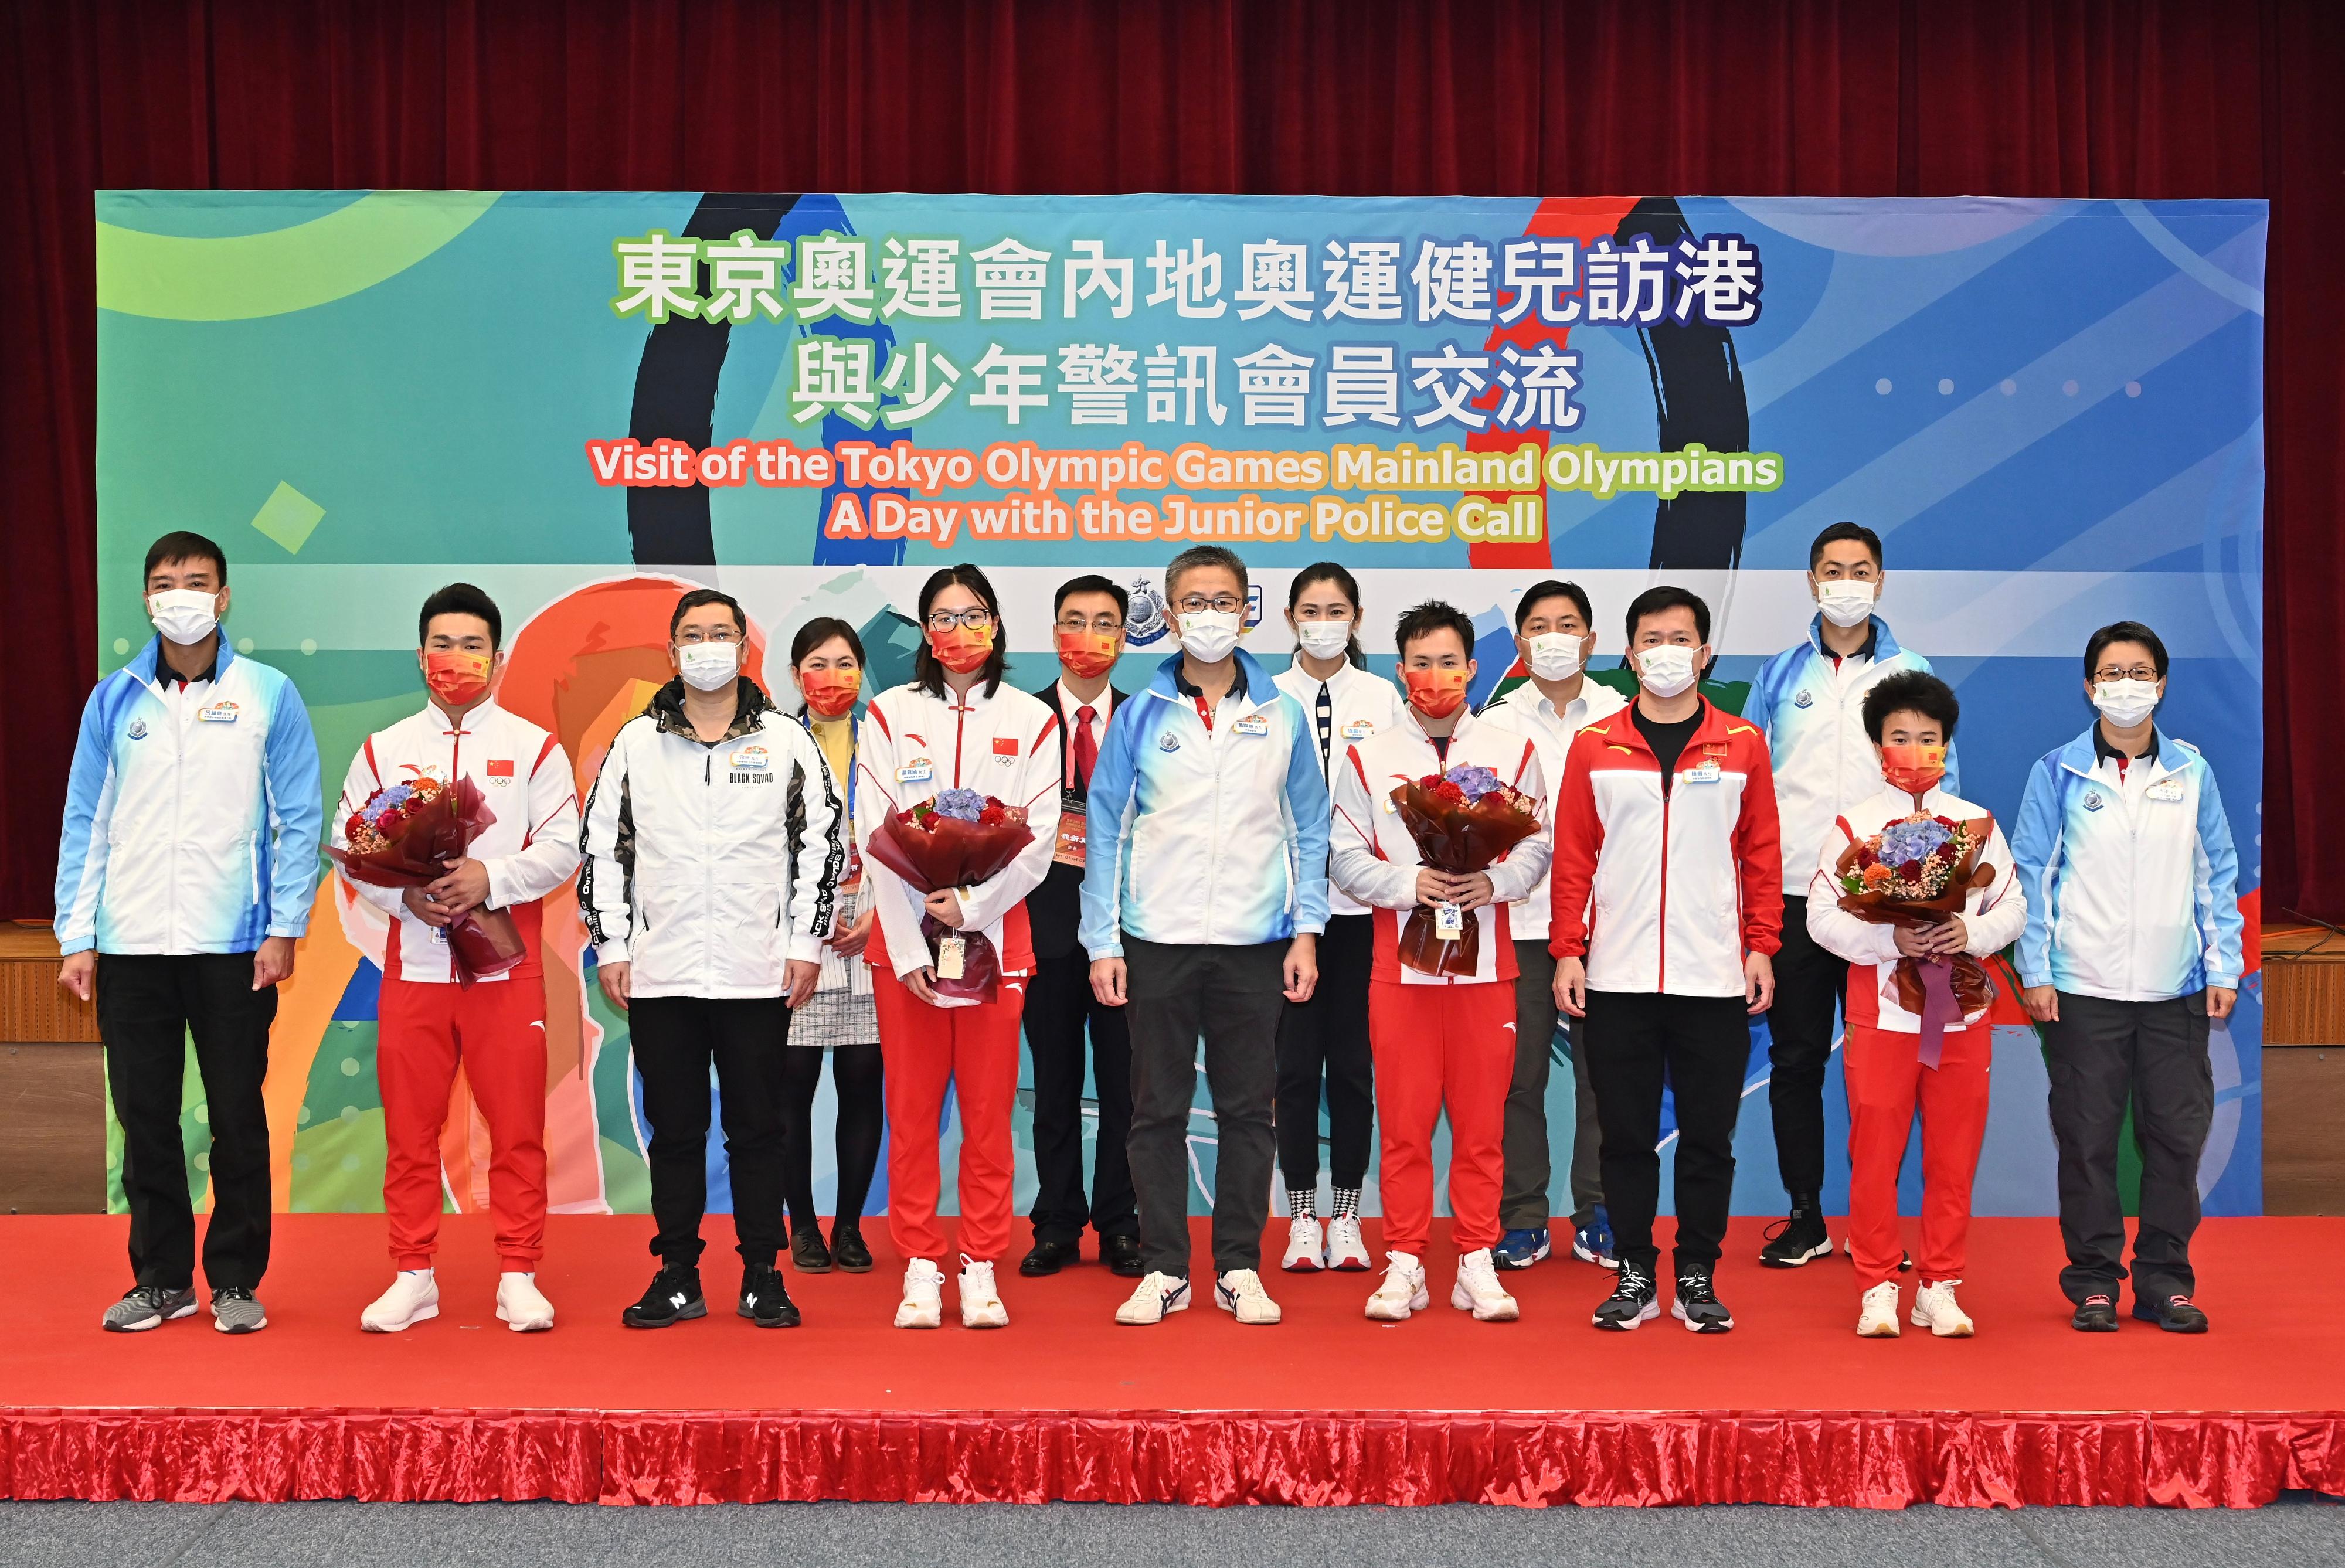 Four athlete representatives from the delegation of Tokyo 2020 Olympic Games Mainland Olympians, who arrived in Hong Kong on December 3 for a three-day visit, met with members of Junior Police Call at the Hong Kong Police College this morning (December 5). Photo shows (front row, from left) the Chairman of the Police Sports Council, Mr Lui Kam-ho; Mainland weightlifting athlete Shi Zhiyong; the Deputy Director-General of the Department of Youth Affairs of the Liaison Office of the Central People’s Government in the Hong Kong Special Administrative Region (LOCPG), Mr Song Lai; Mainland swimming athlete Tang Muhan; the Commissioner of Police, Mr Siu Chak-yee ; Mainland diving athlete Xie Siyi; the Director-General of the Police Liaison Department of the LOCPG , Mr Chen Feng; Mainland weightlifting athlete Hou Zhihui; and the Assistant Commissioner of Police (Support), Ms Chan Yee-lai; and other guests. 